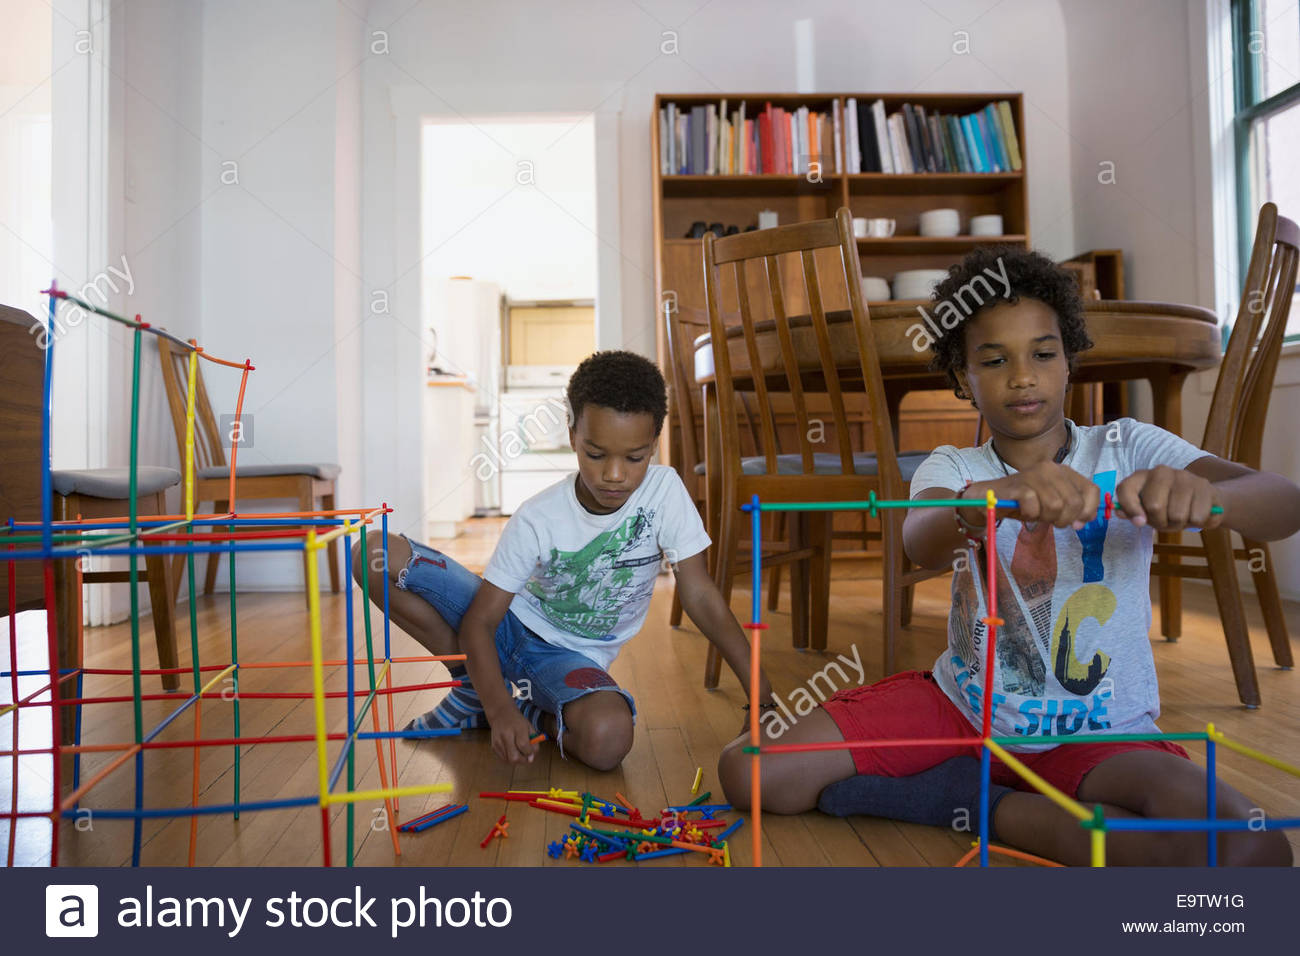 Boys constructing connector toy in living room Stock Photo